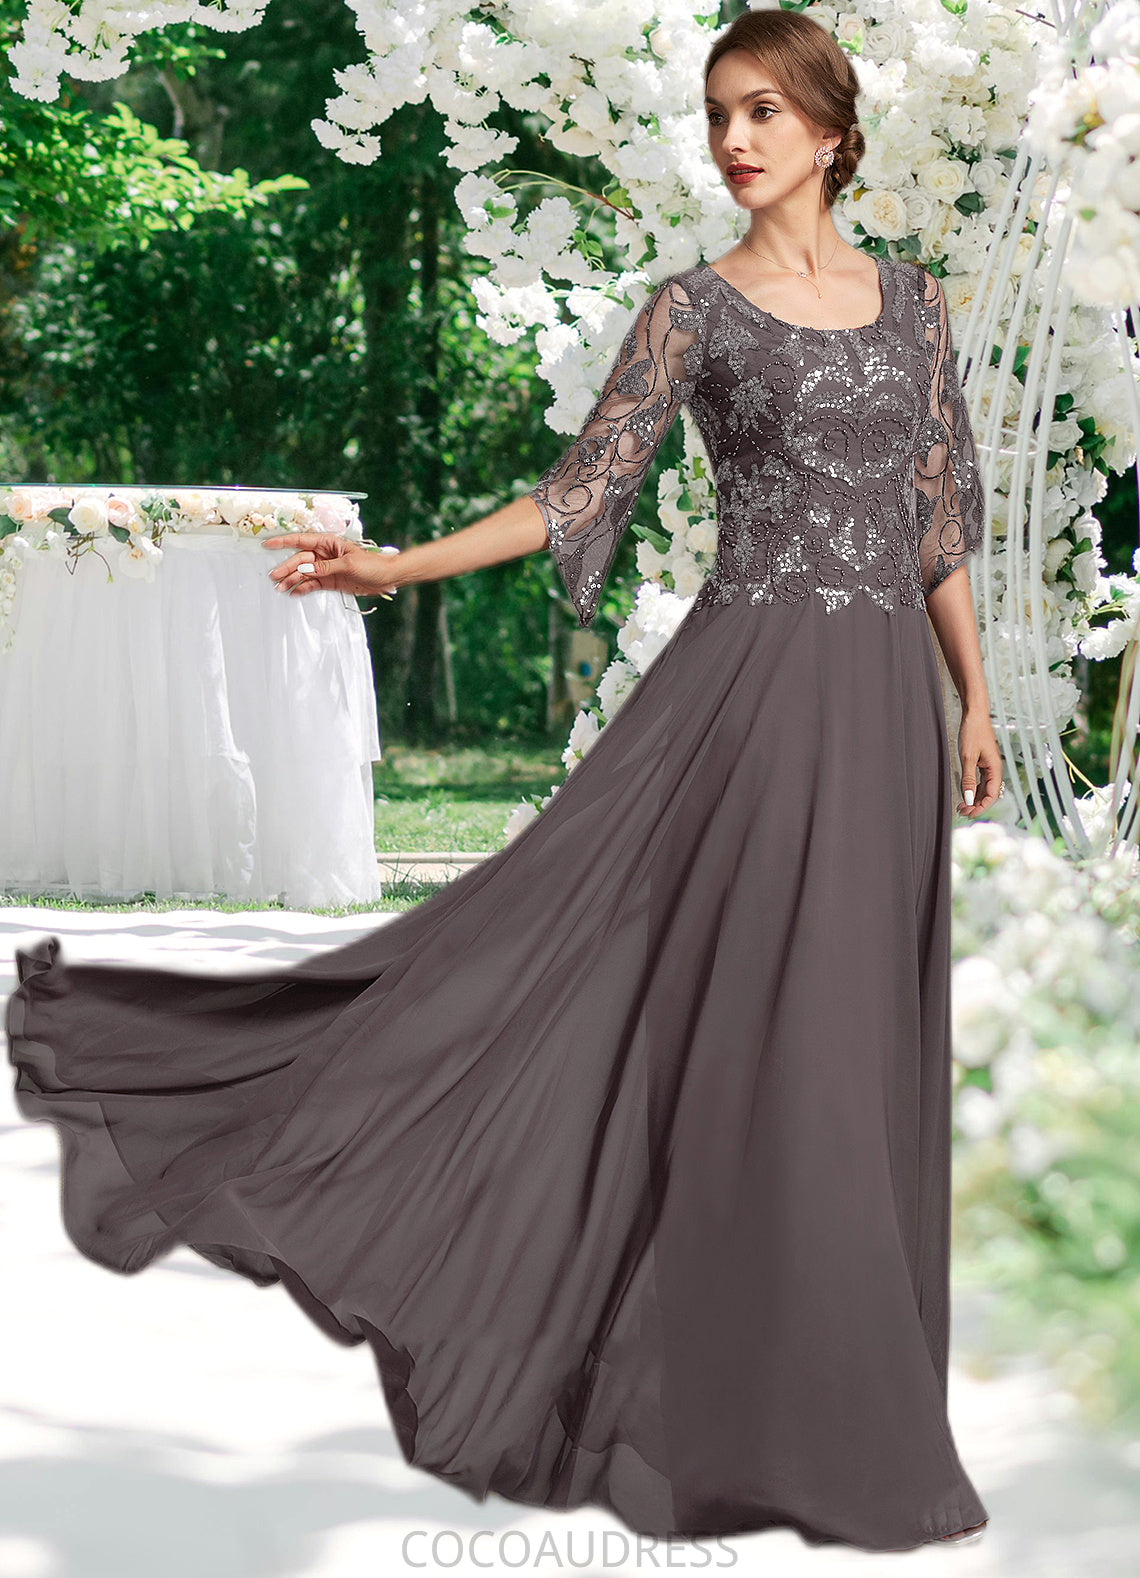 Violet A-Line Scoop Neck Floor-Length Chiffon Lace Mother of the Bride Dress With Beading Sequins 126P0015036